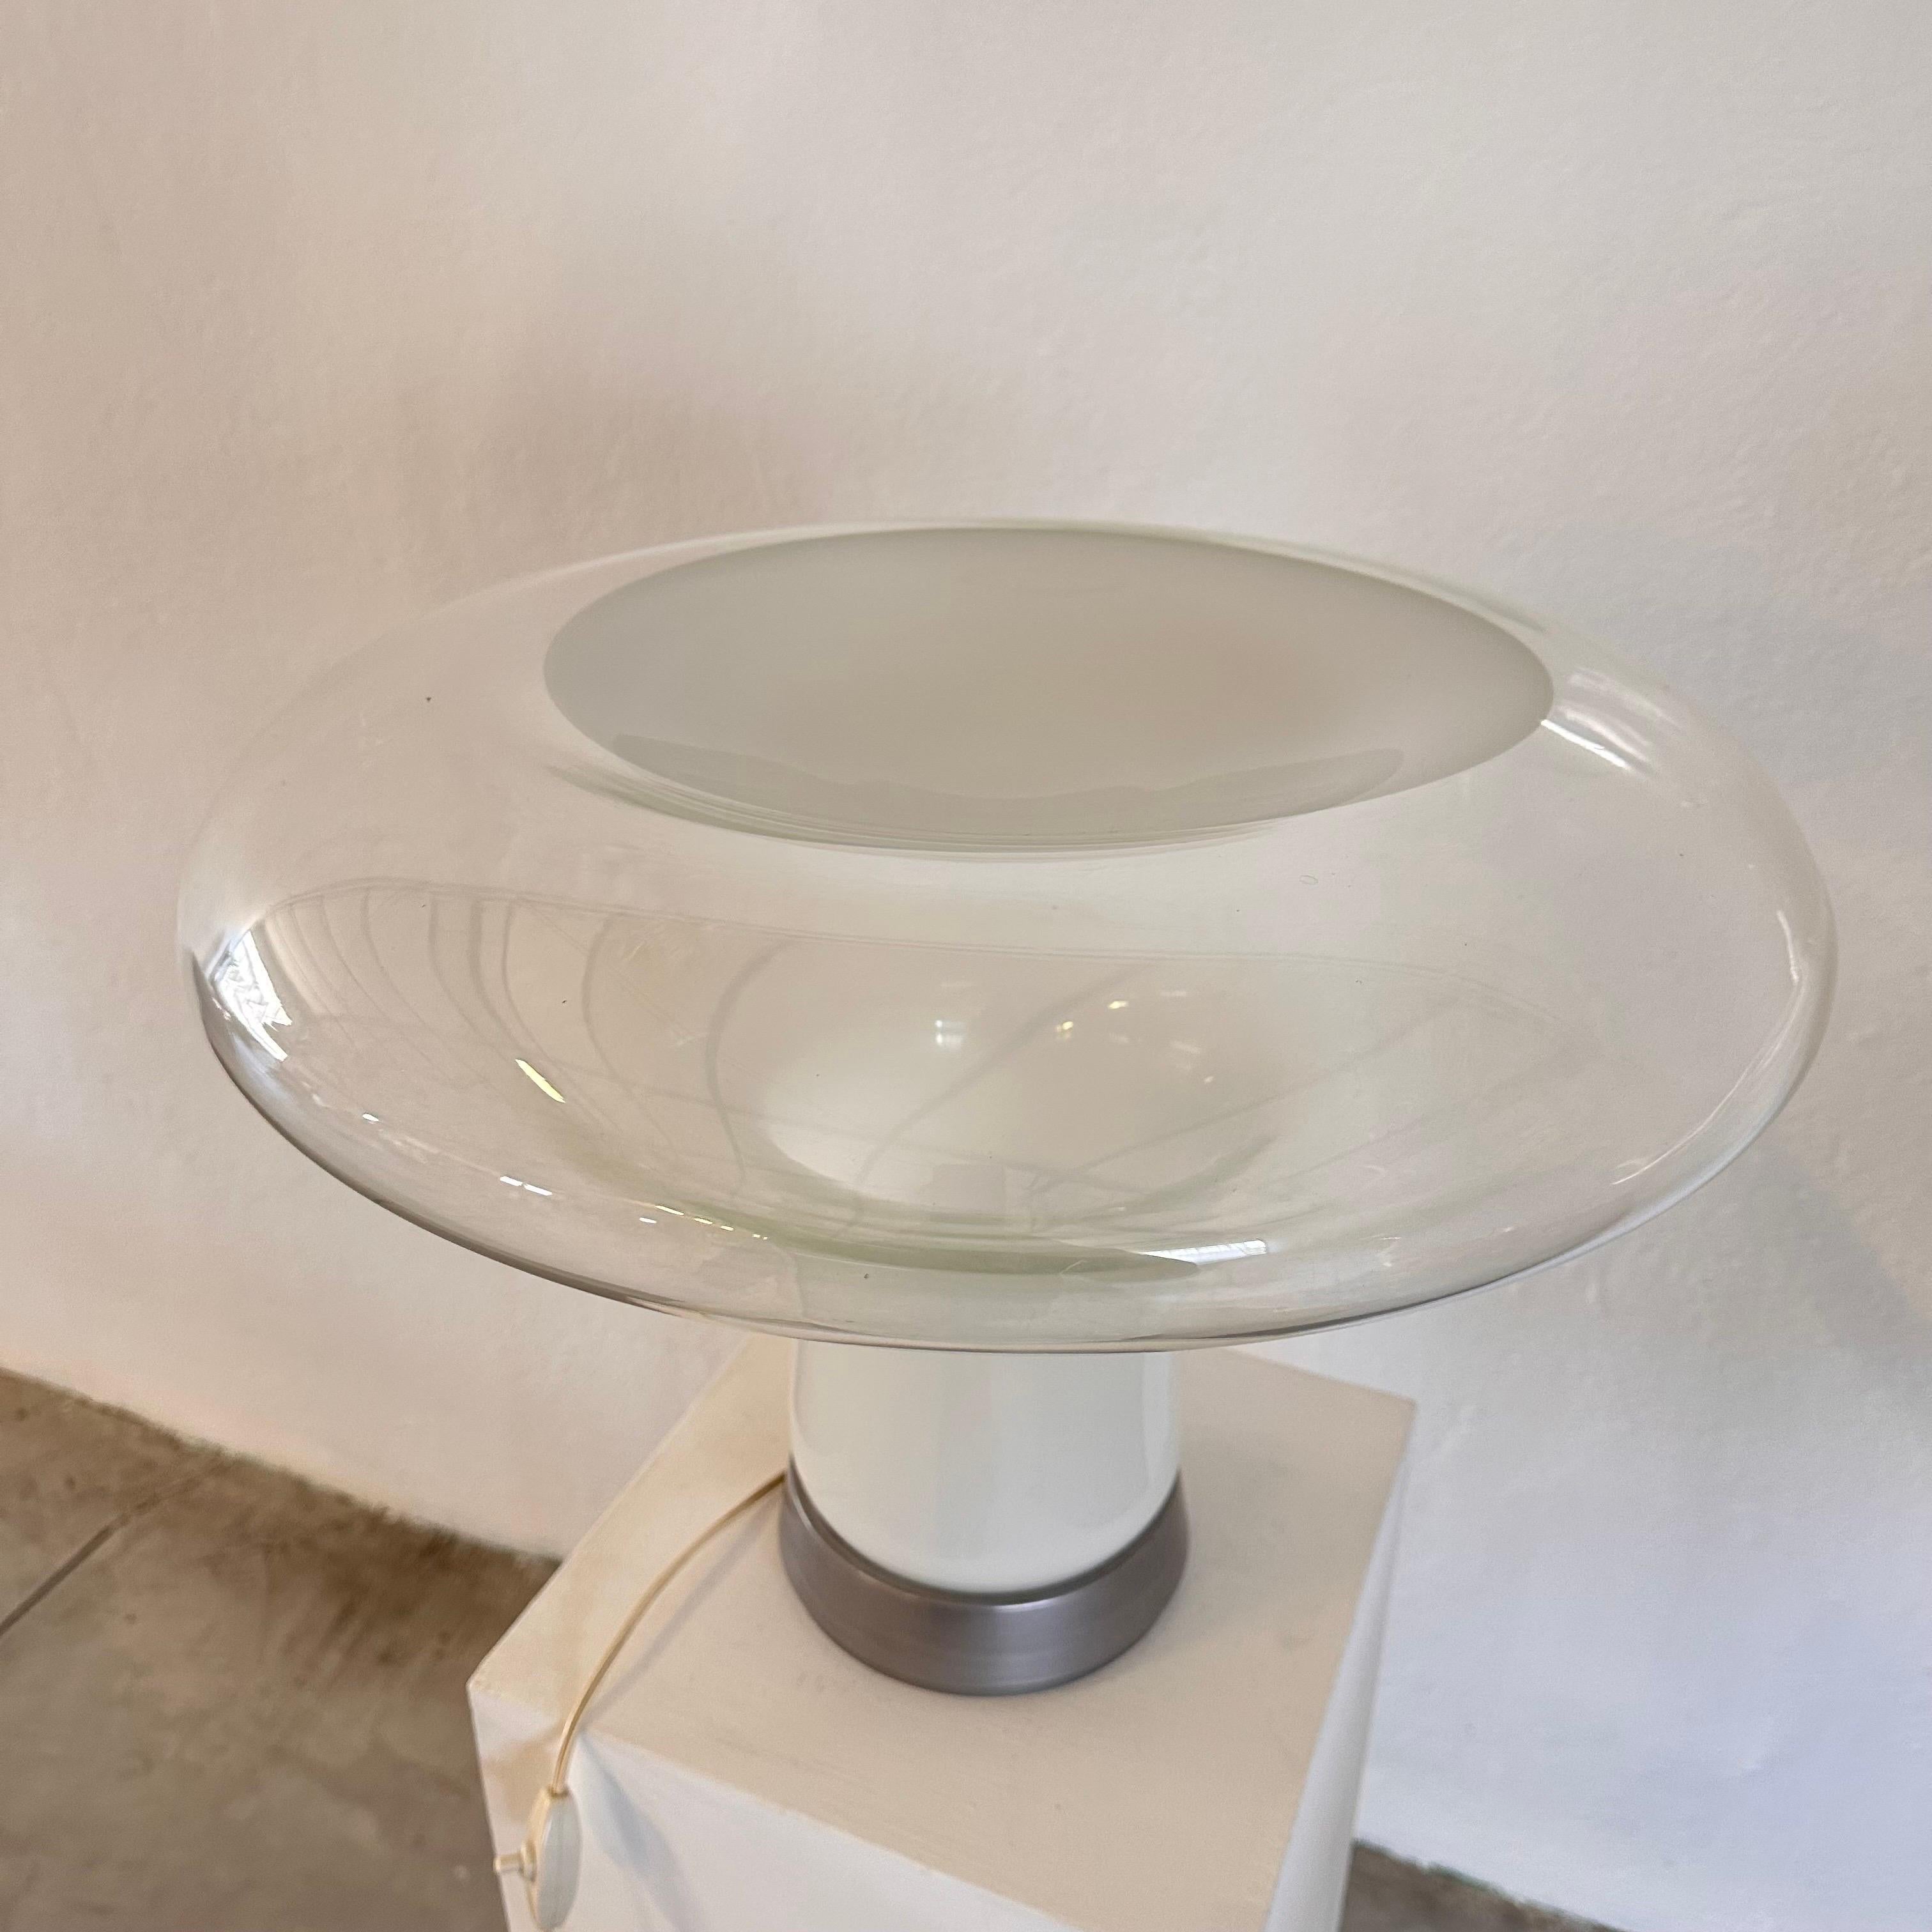 Early Edition Glass Table Lamp by Angelo Mangiarotti for Artemide, 1970s For Sale 2